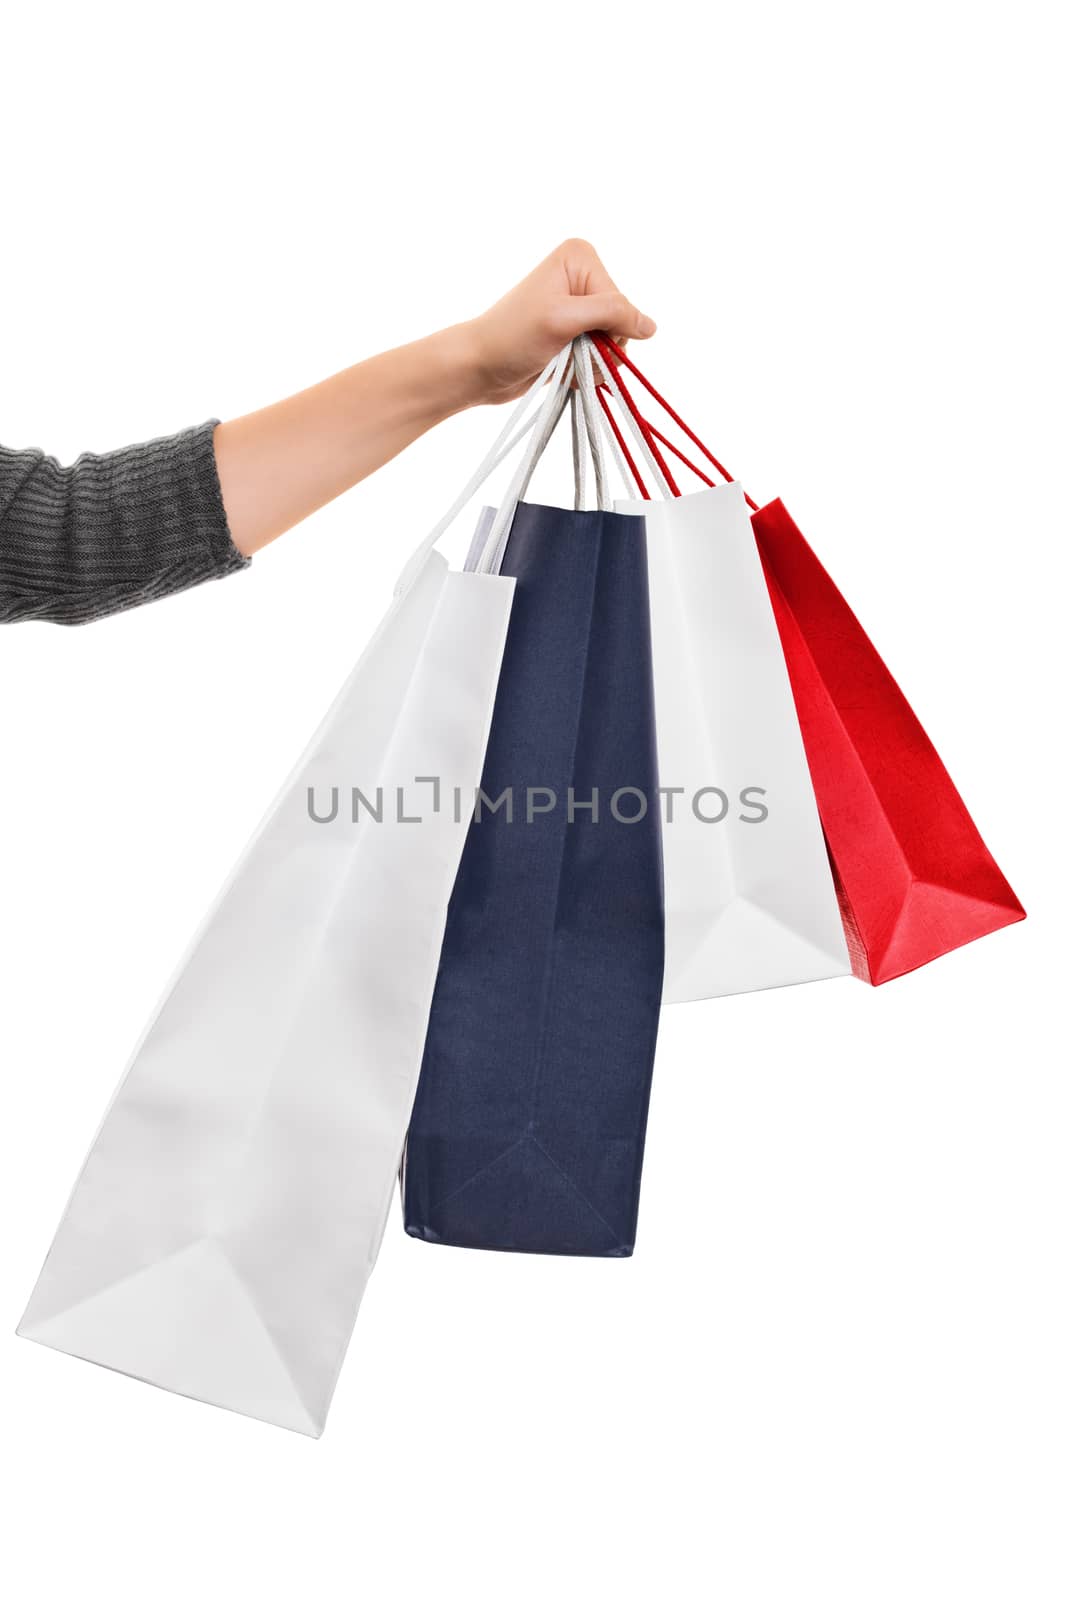 Female hand holding shopping bags isolated on white background by Mendelex